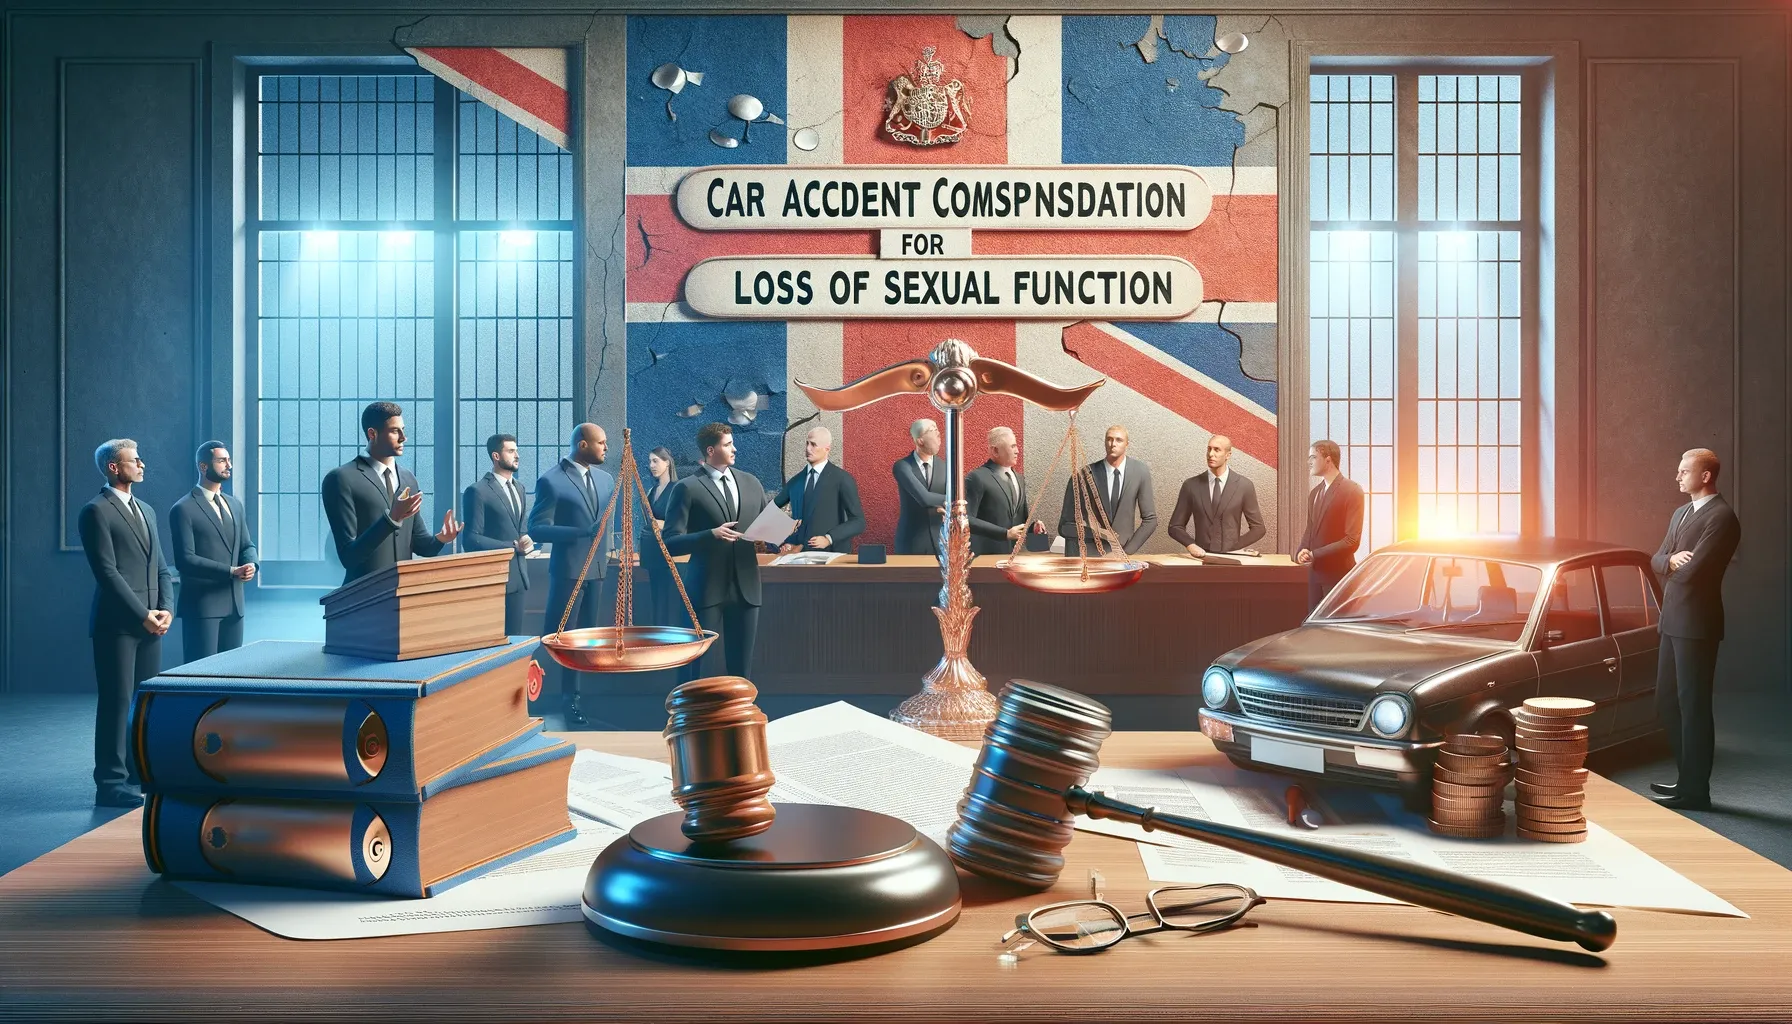 Car Accident Compensation for Loss of Sexual Function in the UK